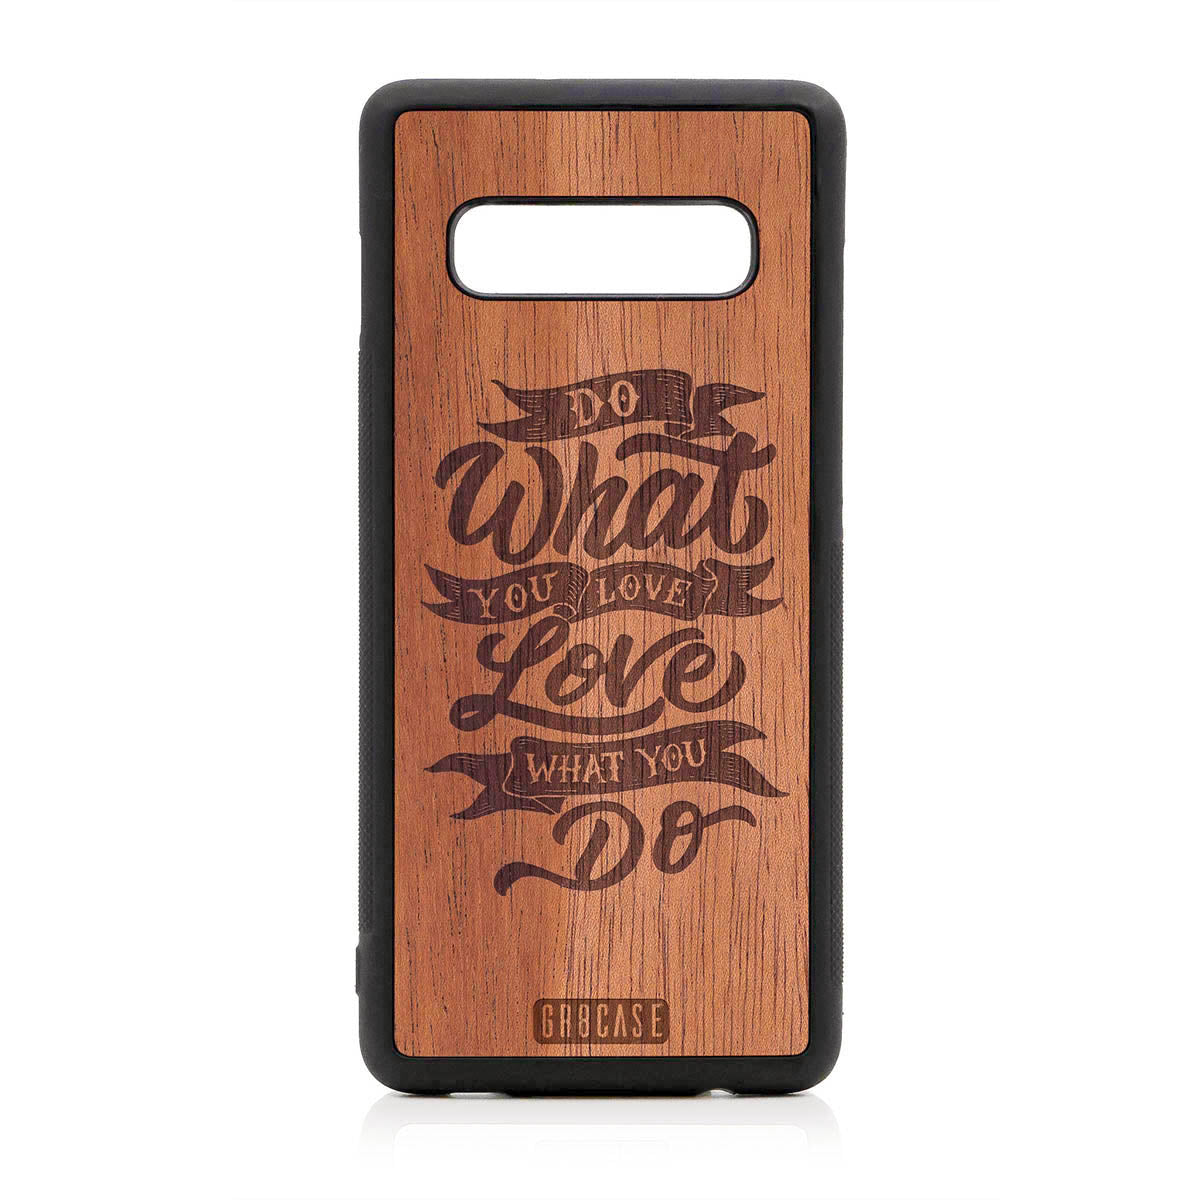 Do What You Love Love What You Do Design Wood Case For Samsung Galaxy S10 Plus by GR8CASE